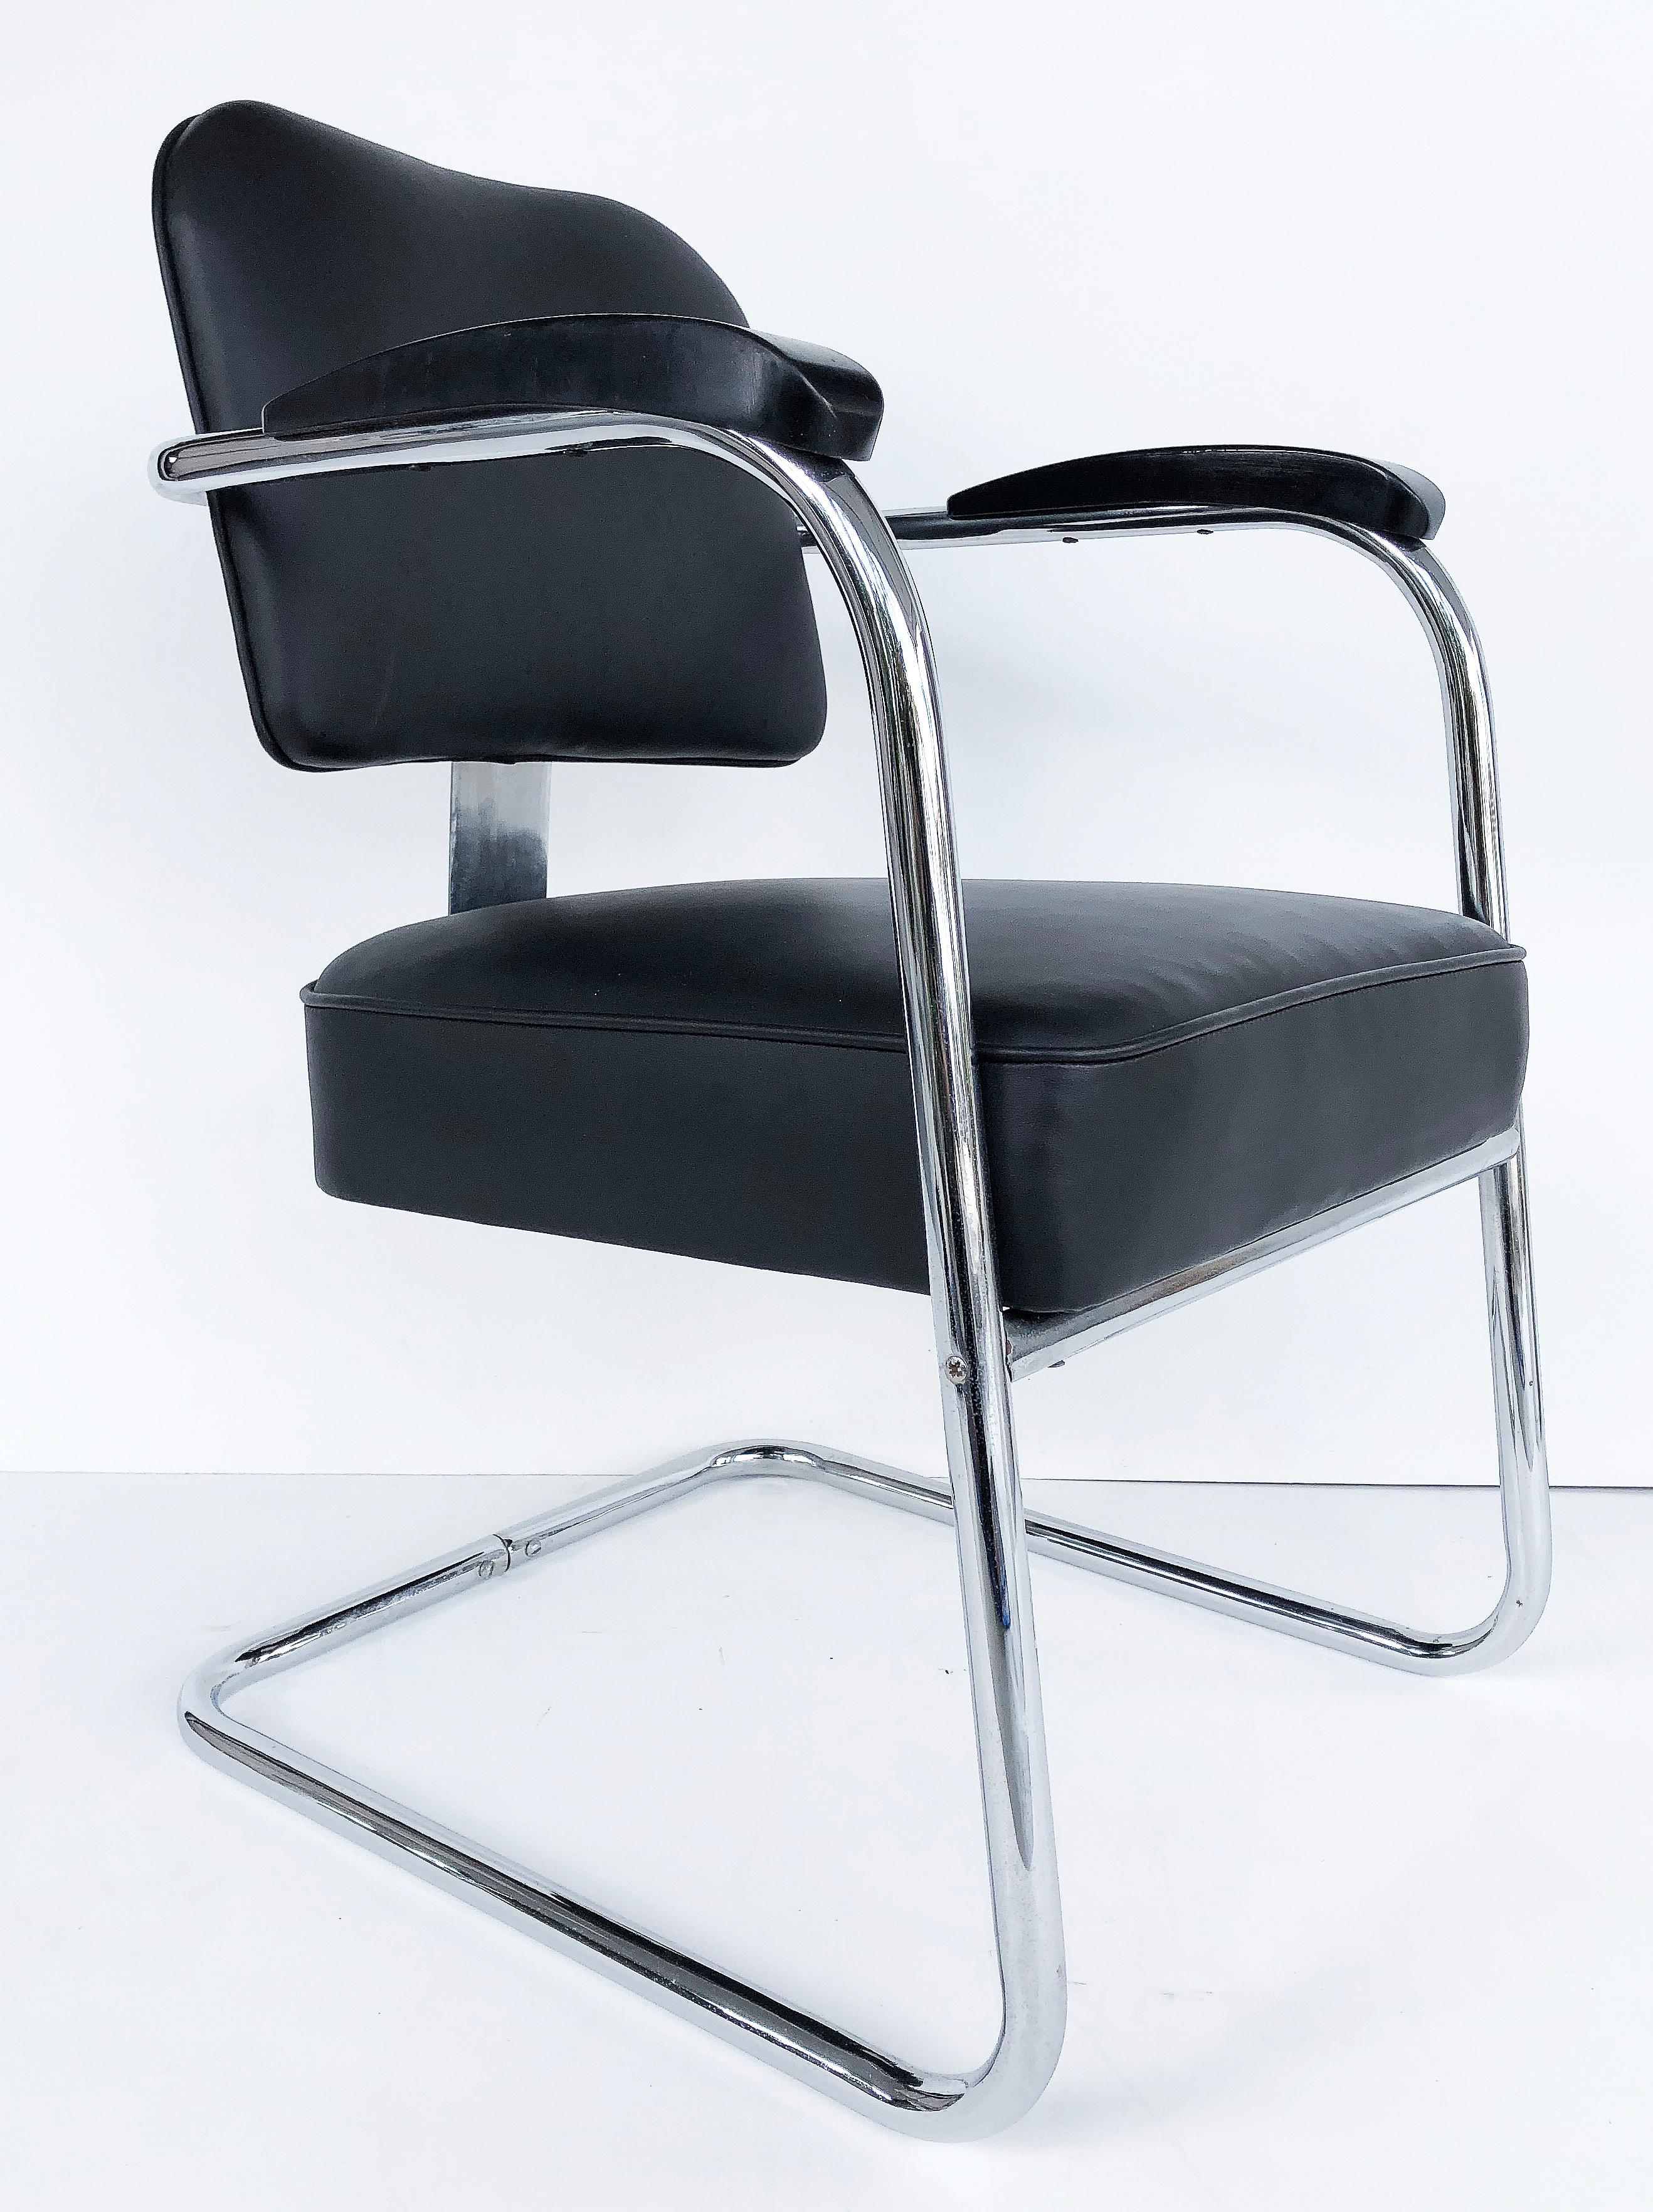 Salvatore Bevelacqua Art Deco armchairs for Mckay Company, American

Offered for sale is a pair of American art deco armchairs designed by Salvatore Bevelacqua for the Mckay Company. They are constructed of chromed steel tubing with a broad flat